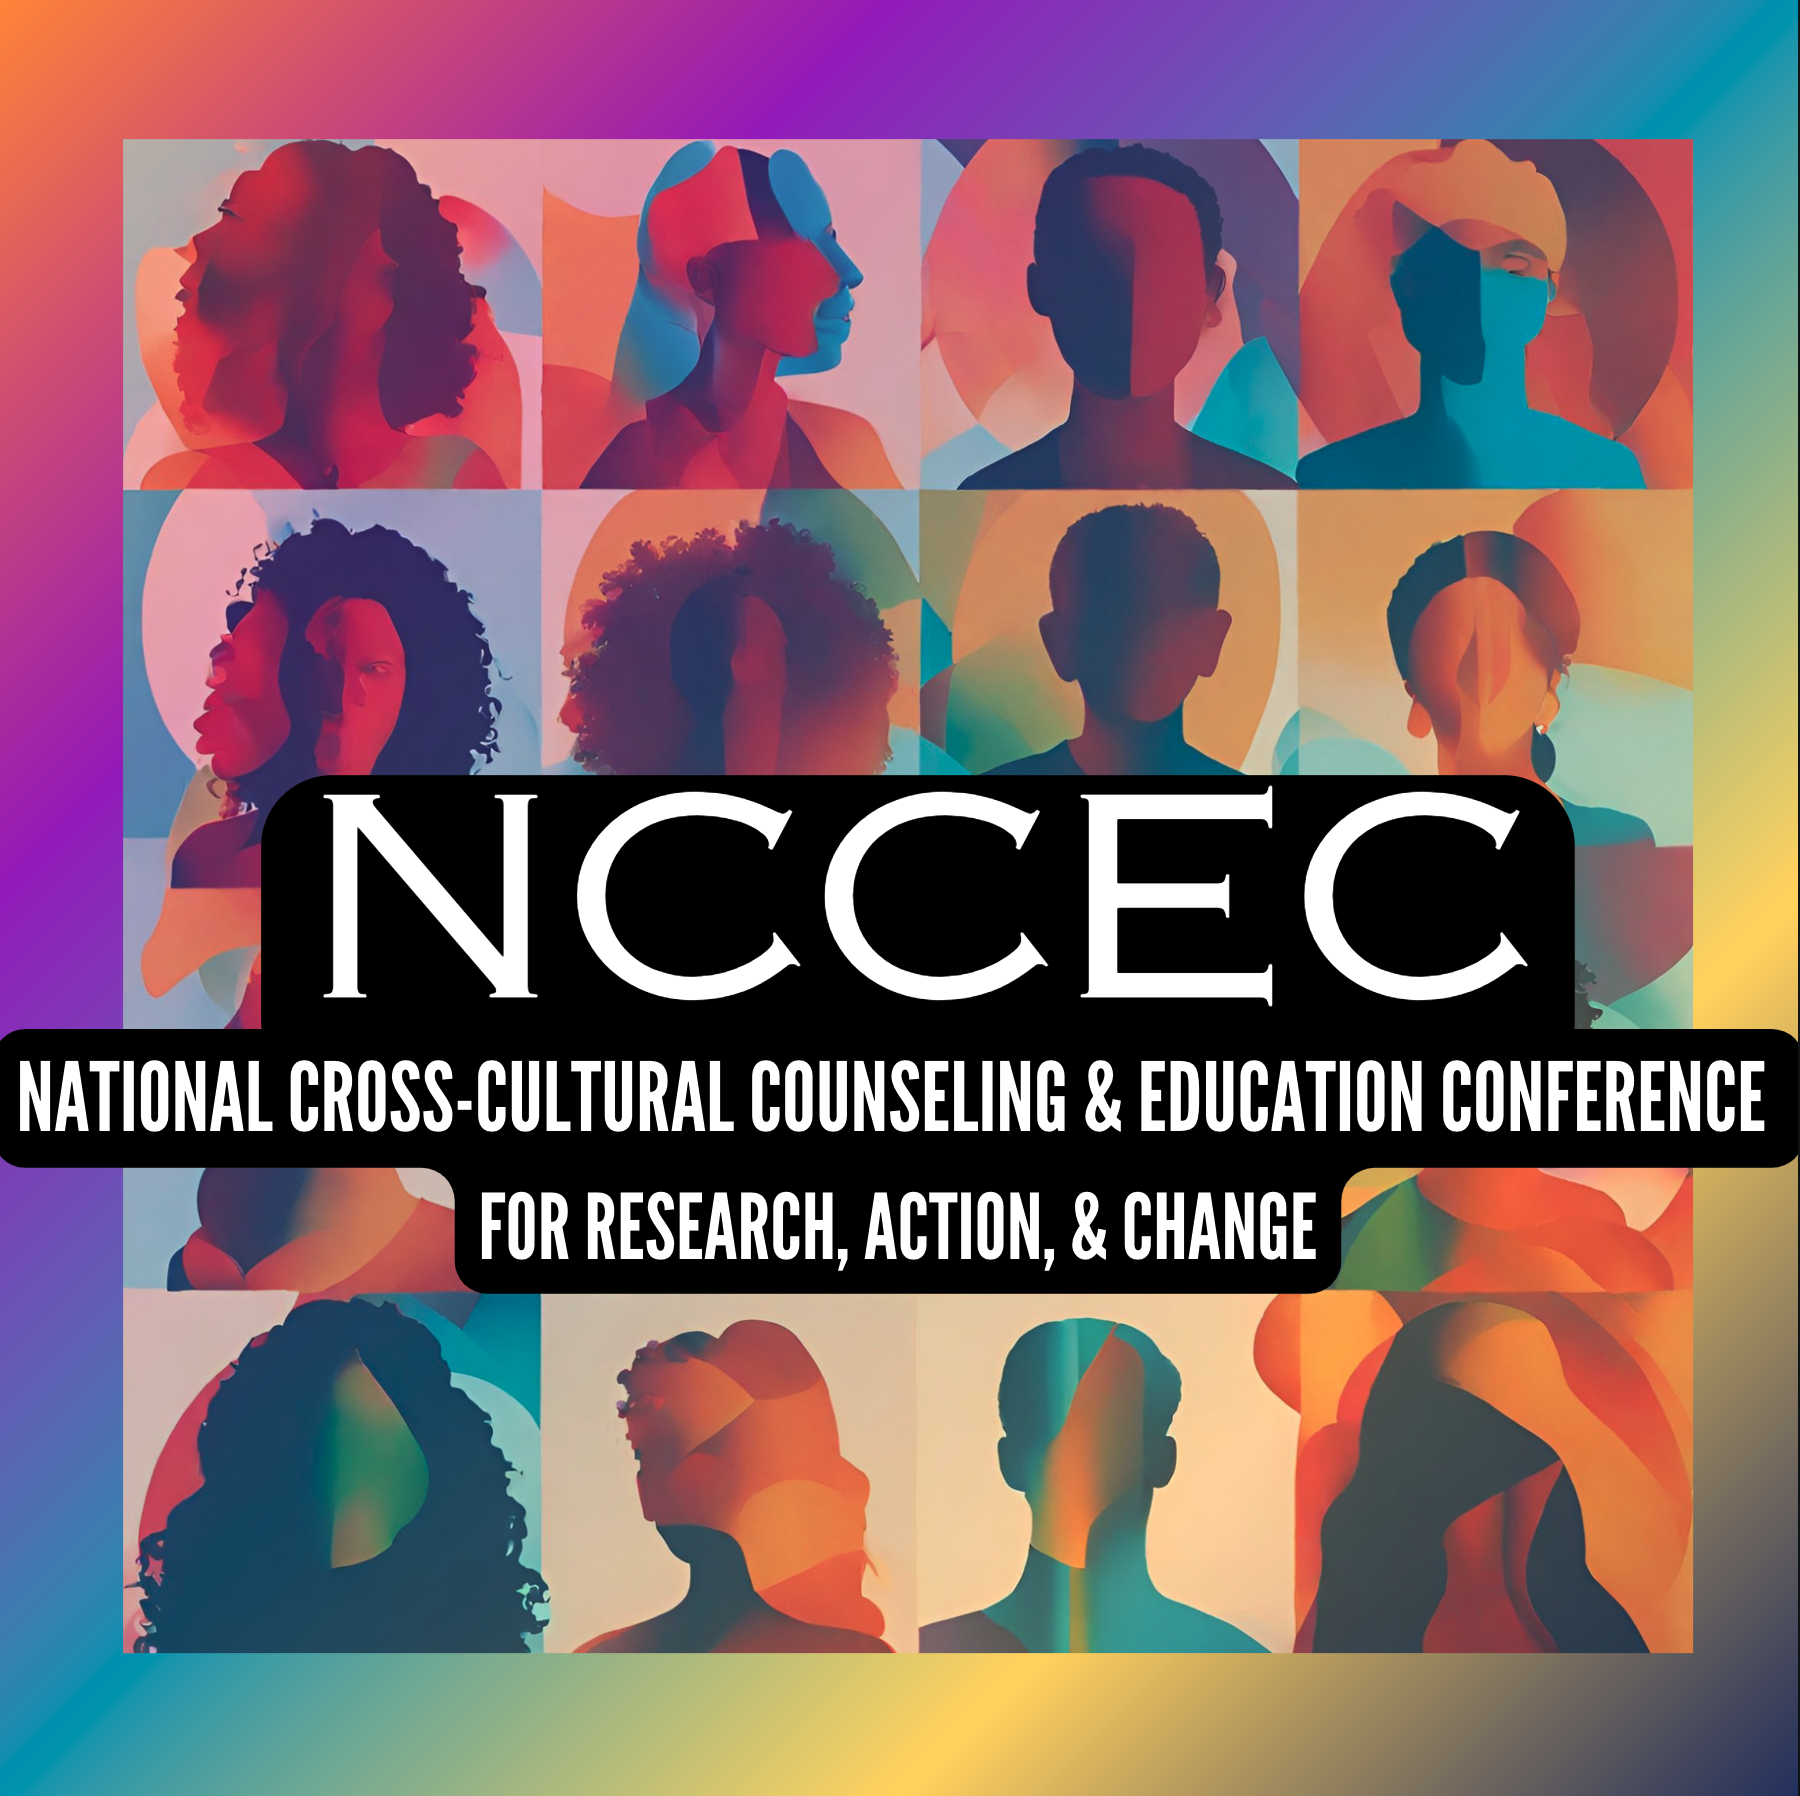 National Cross-Cultural Counseling and Education Conference for Research, Action, and Change